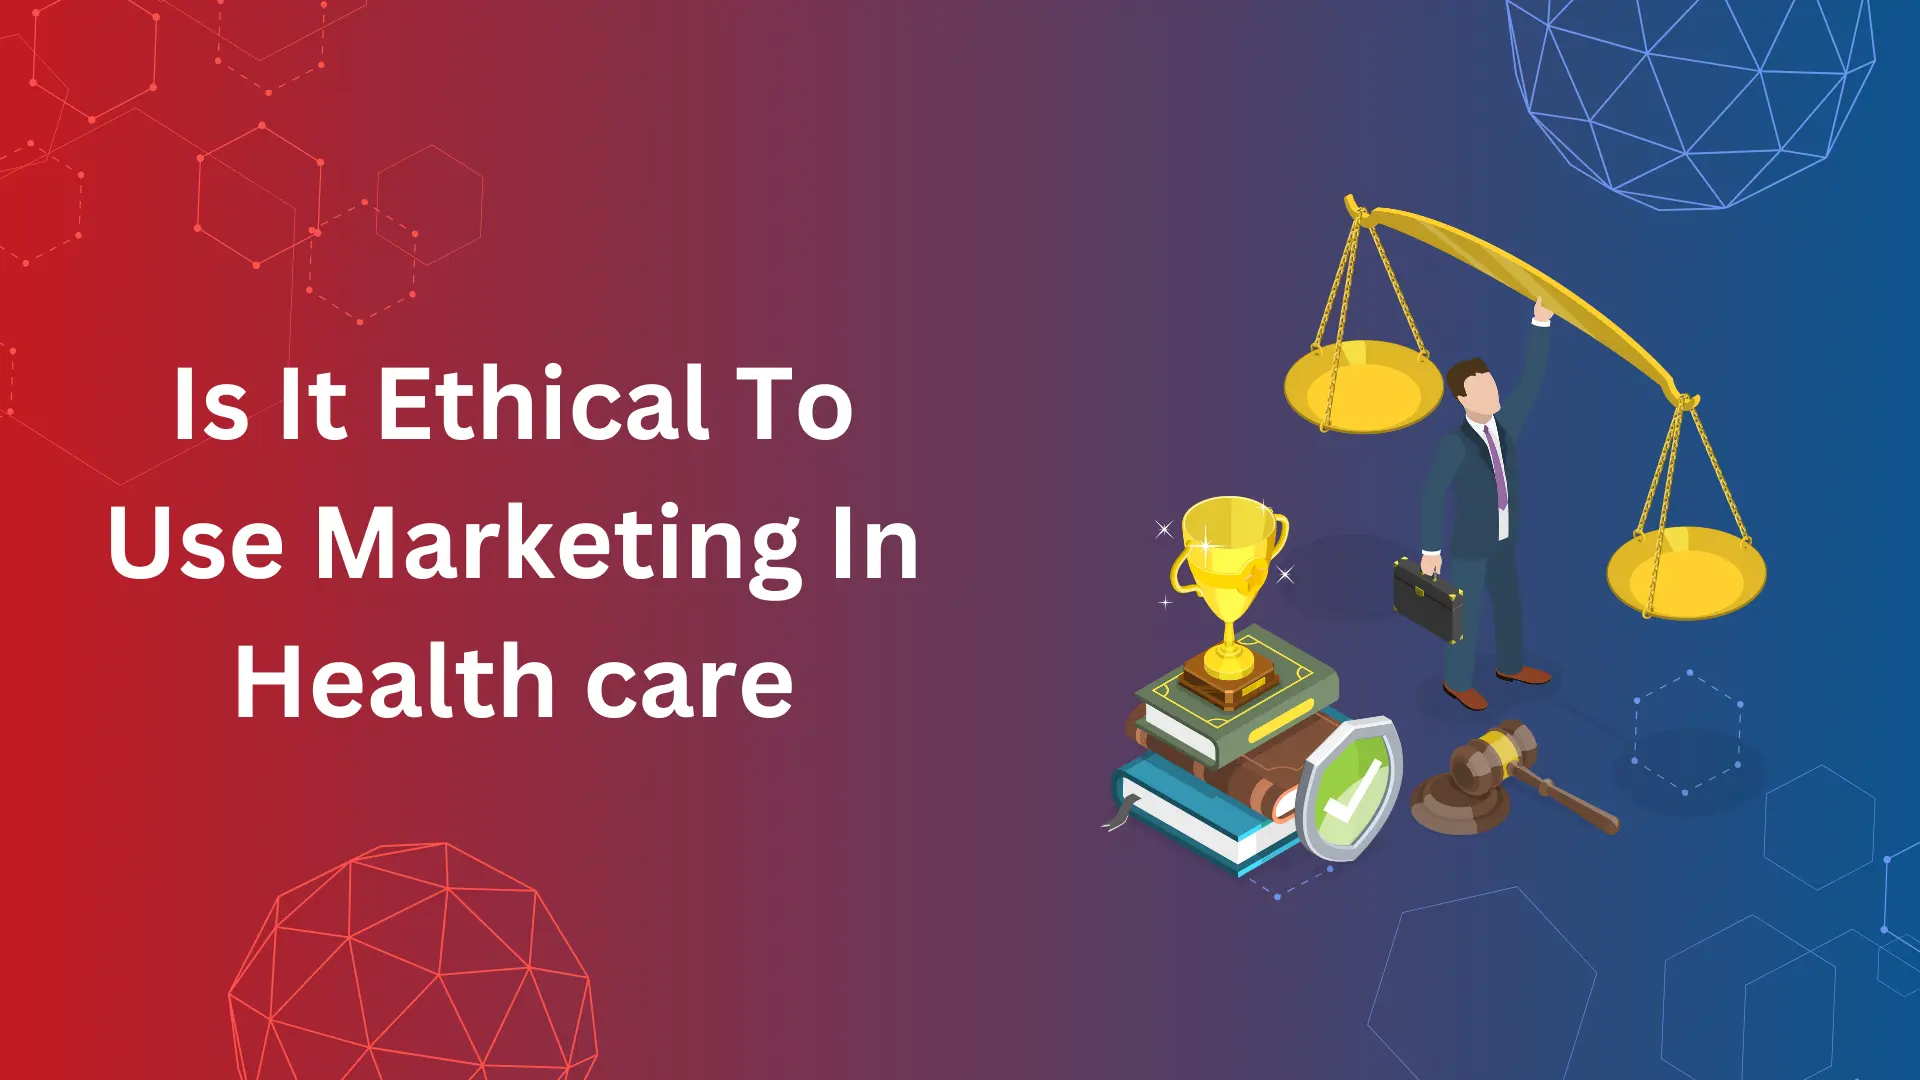 Is it ethical to use marketing in health care